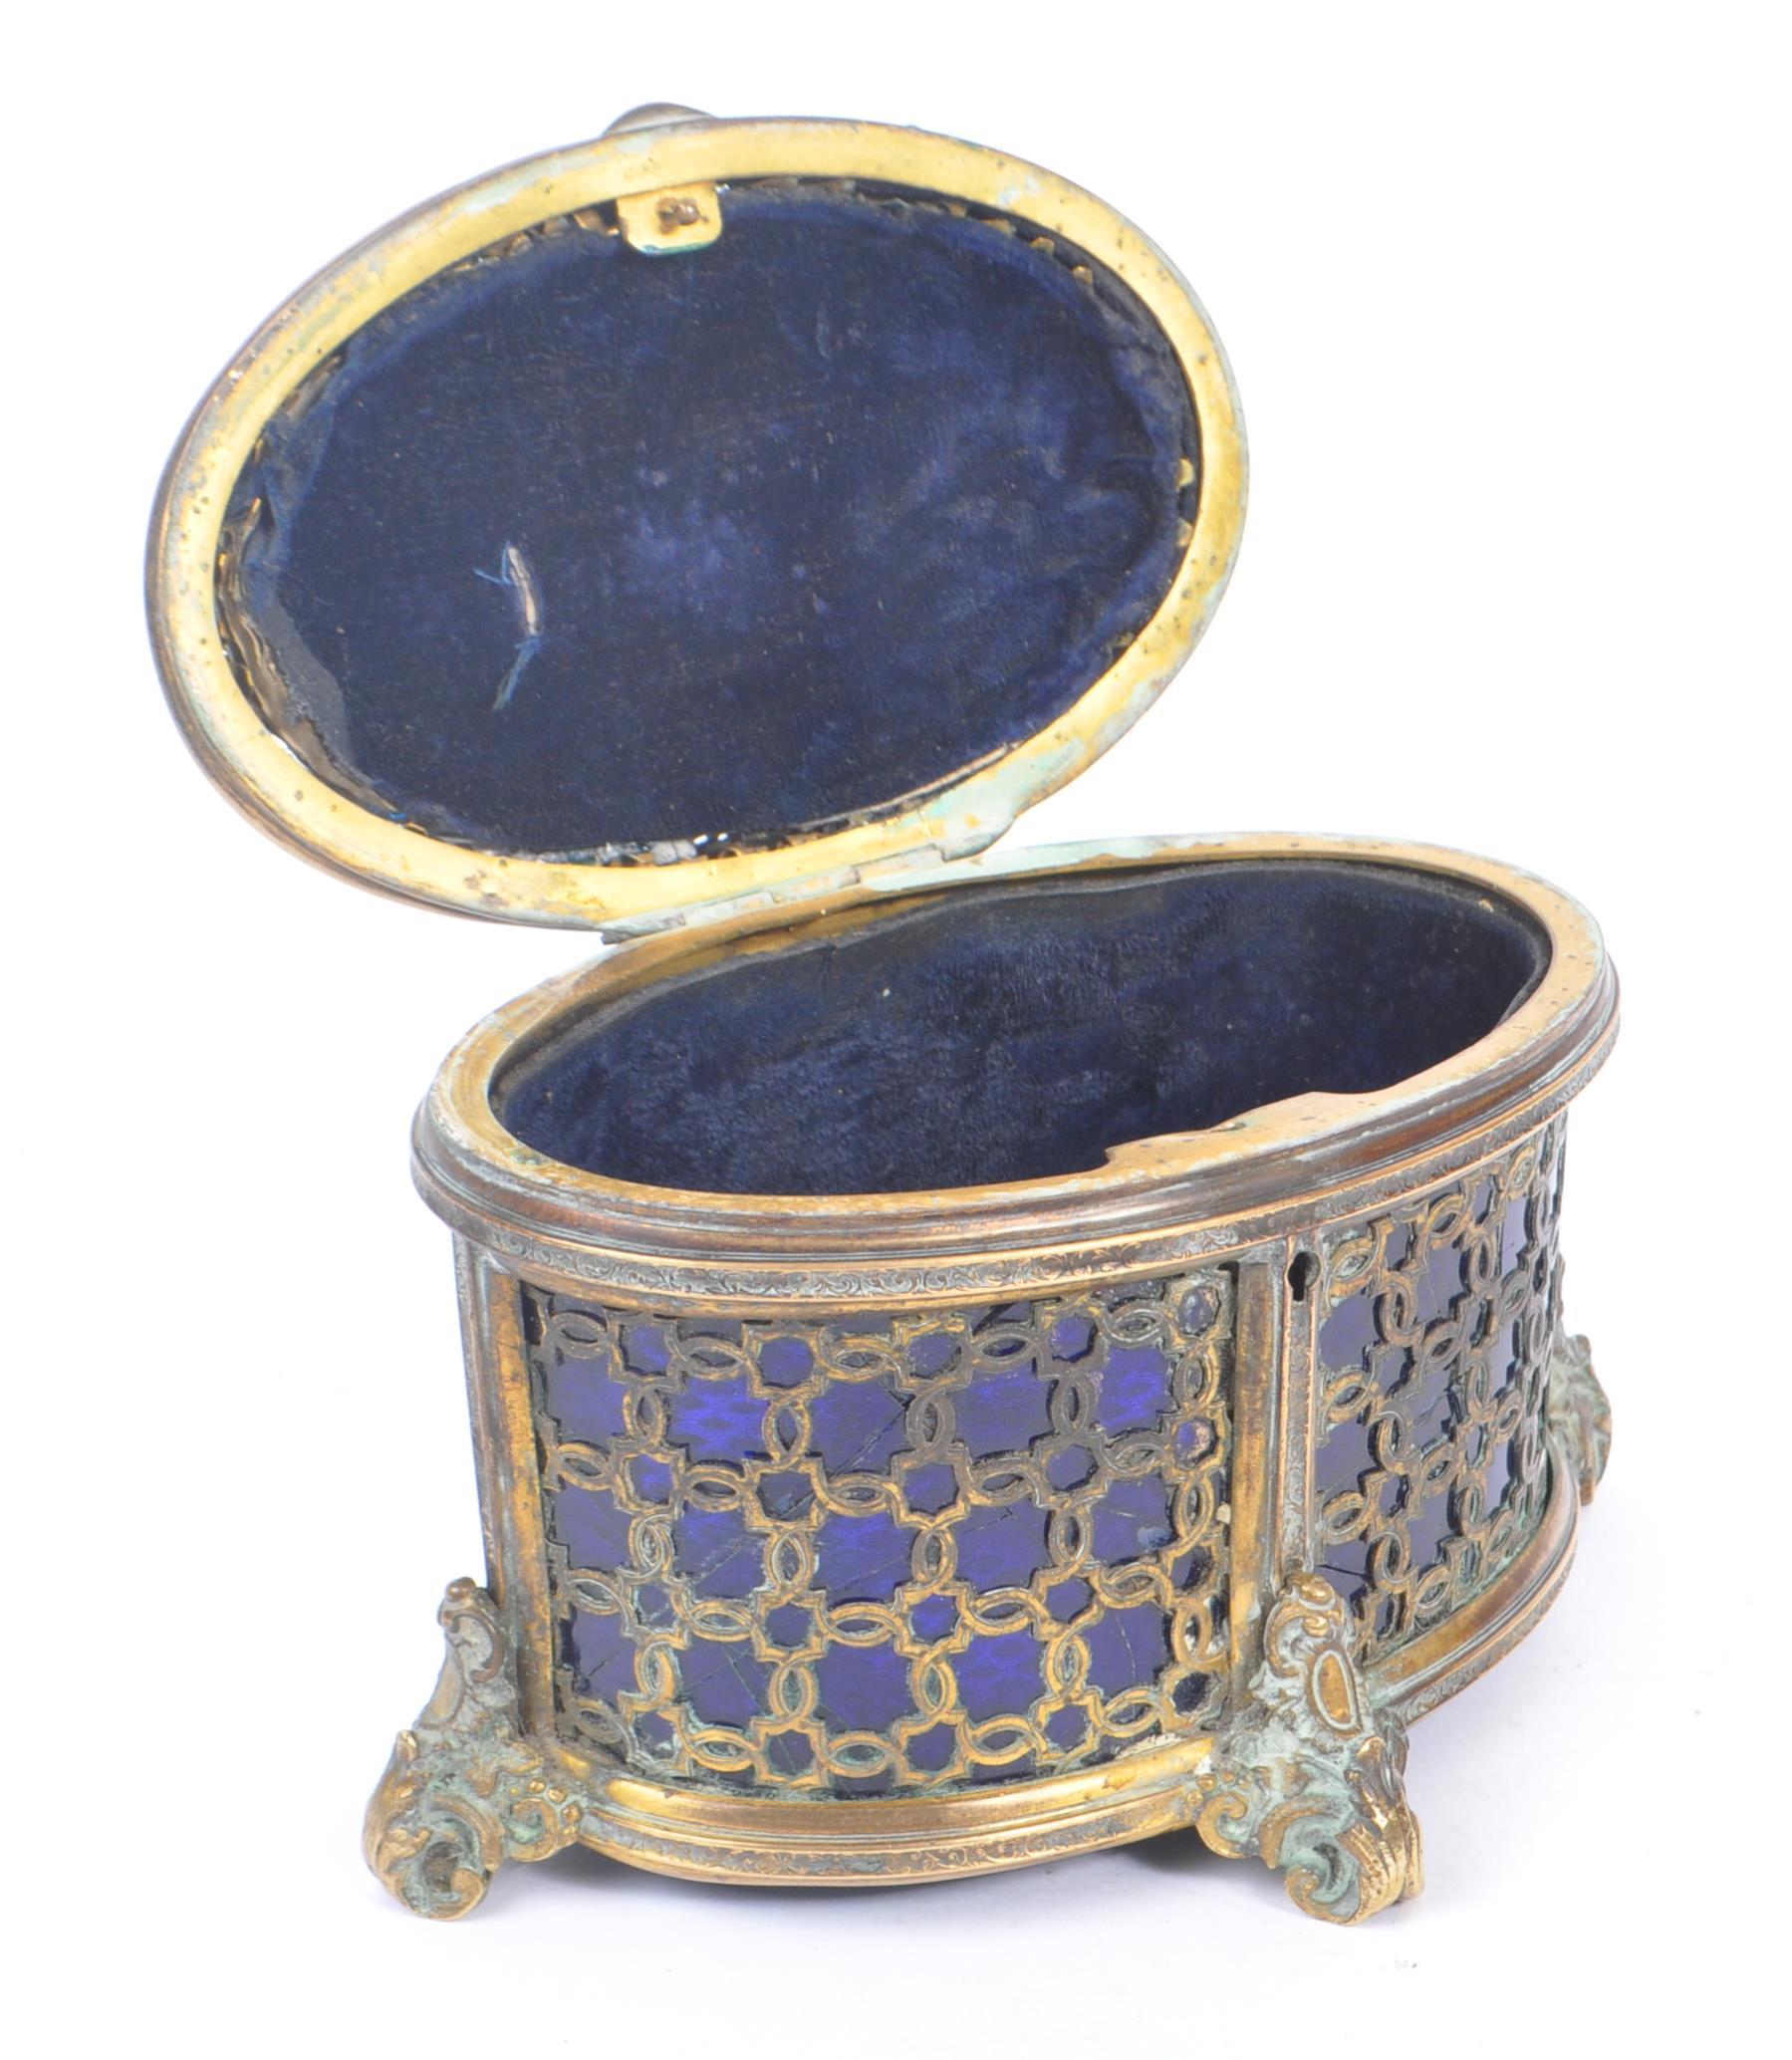 EARLY 20TH CENTURY BRASS AND BLUE GLASS TRINKET BOX - Image 5 of 6